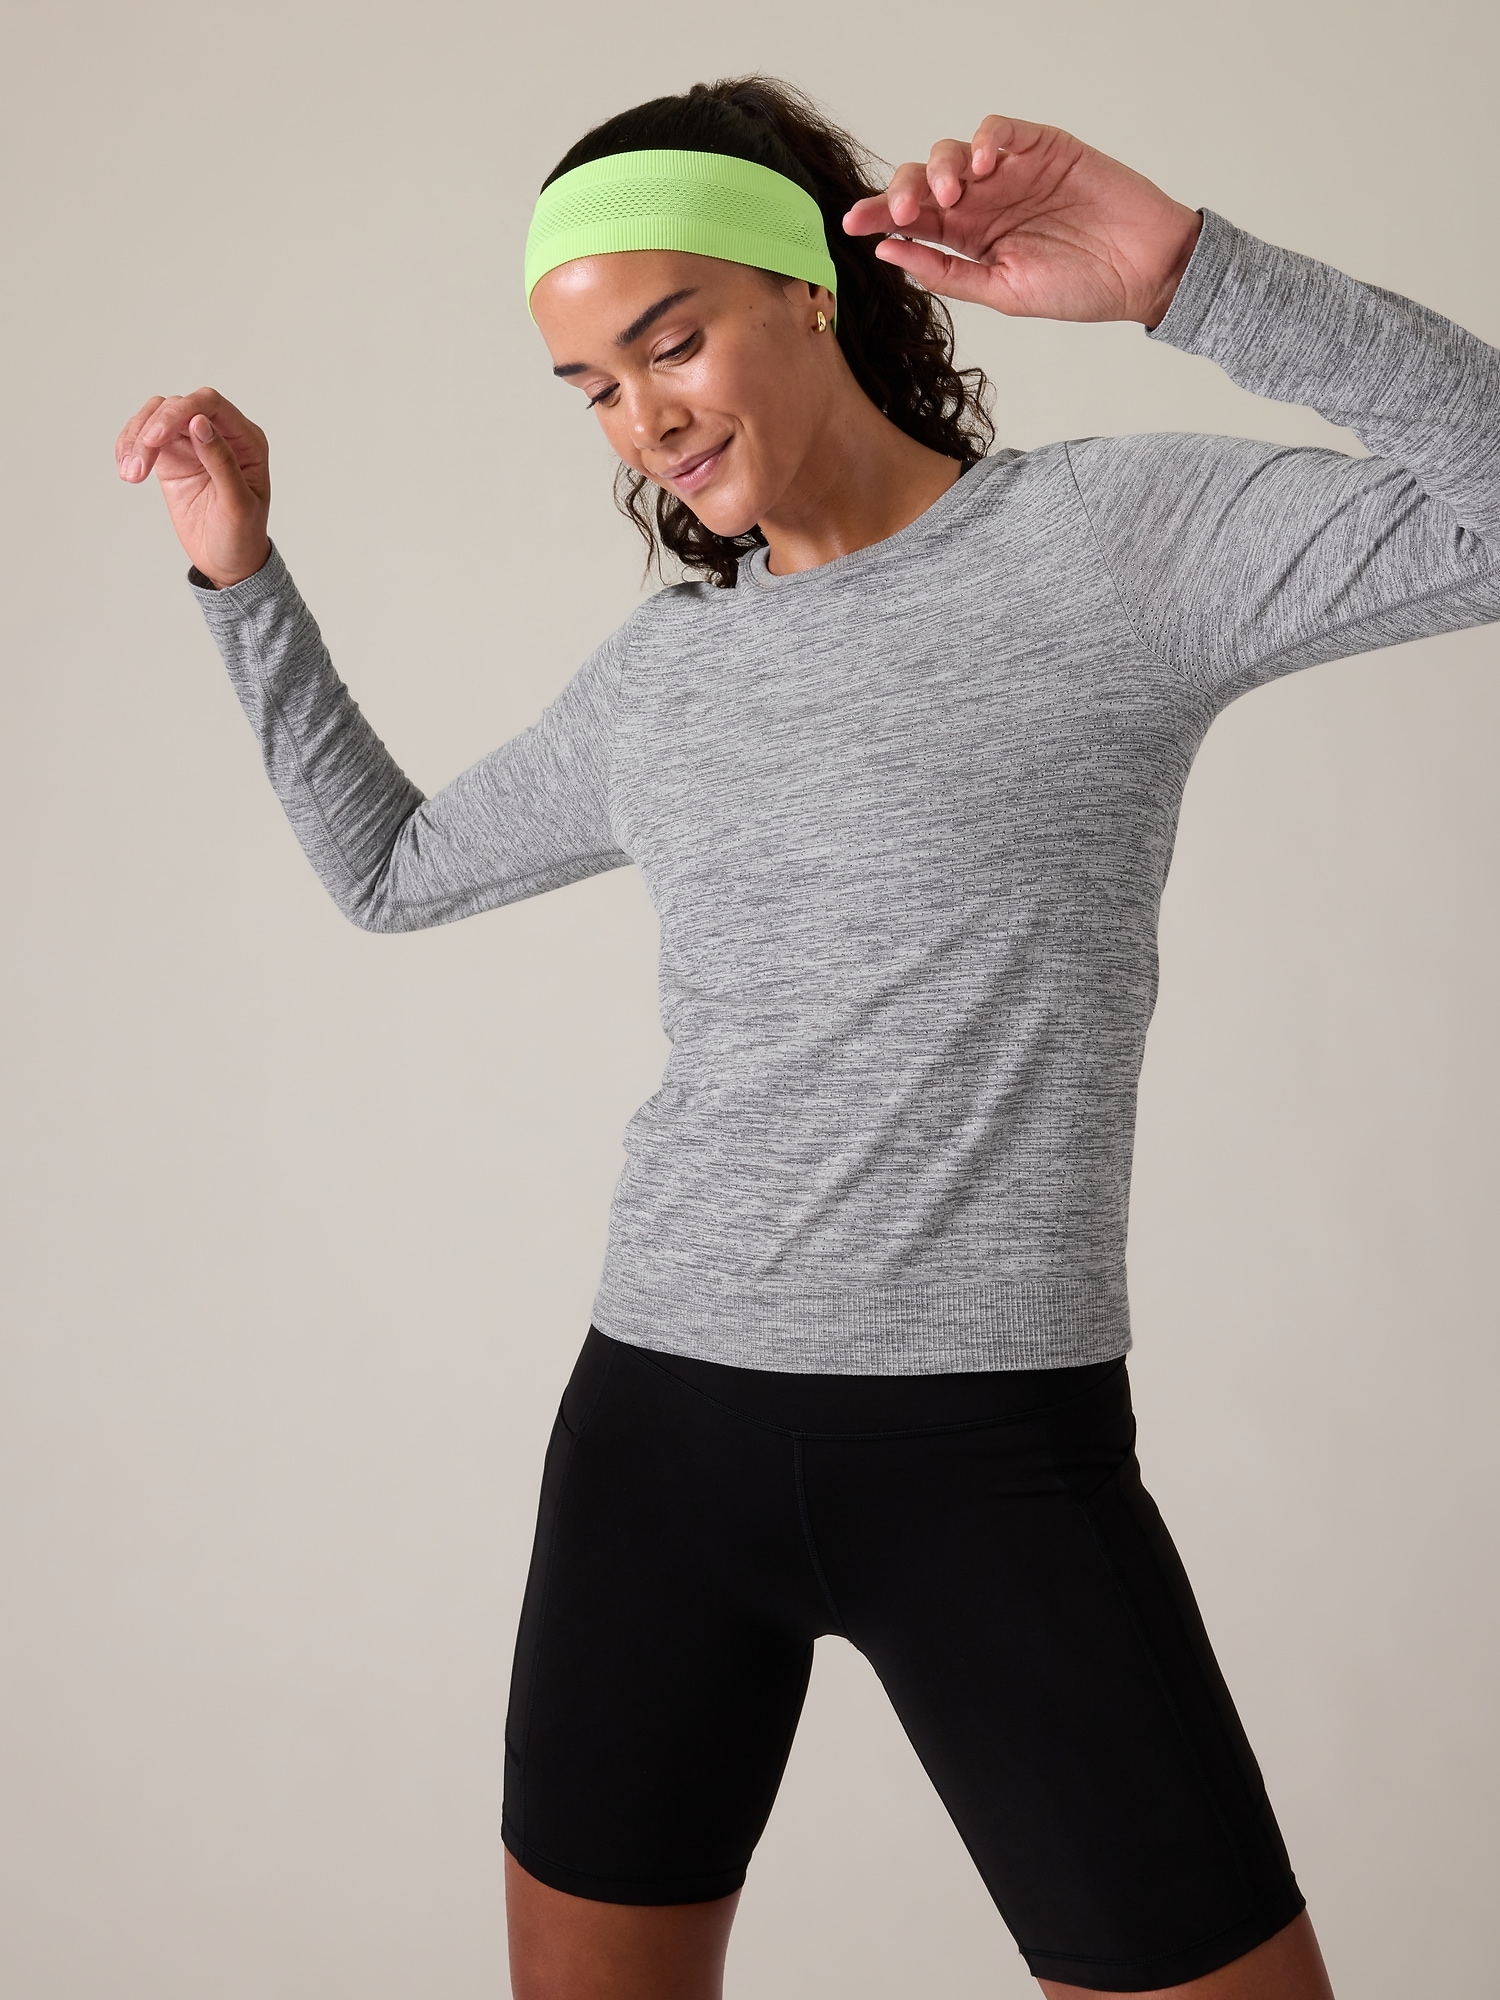 ALL IN MOTION WOMEN'S ACTIVE TOP Long Sleeve Thumb Hole WHITE